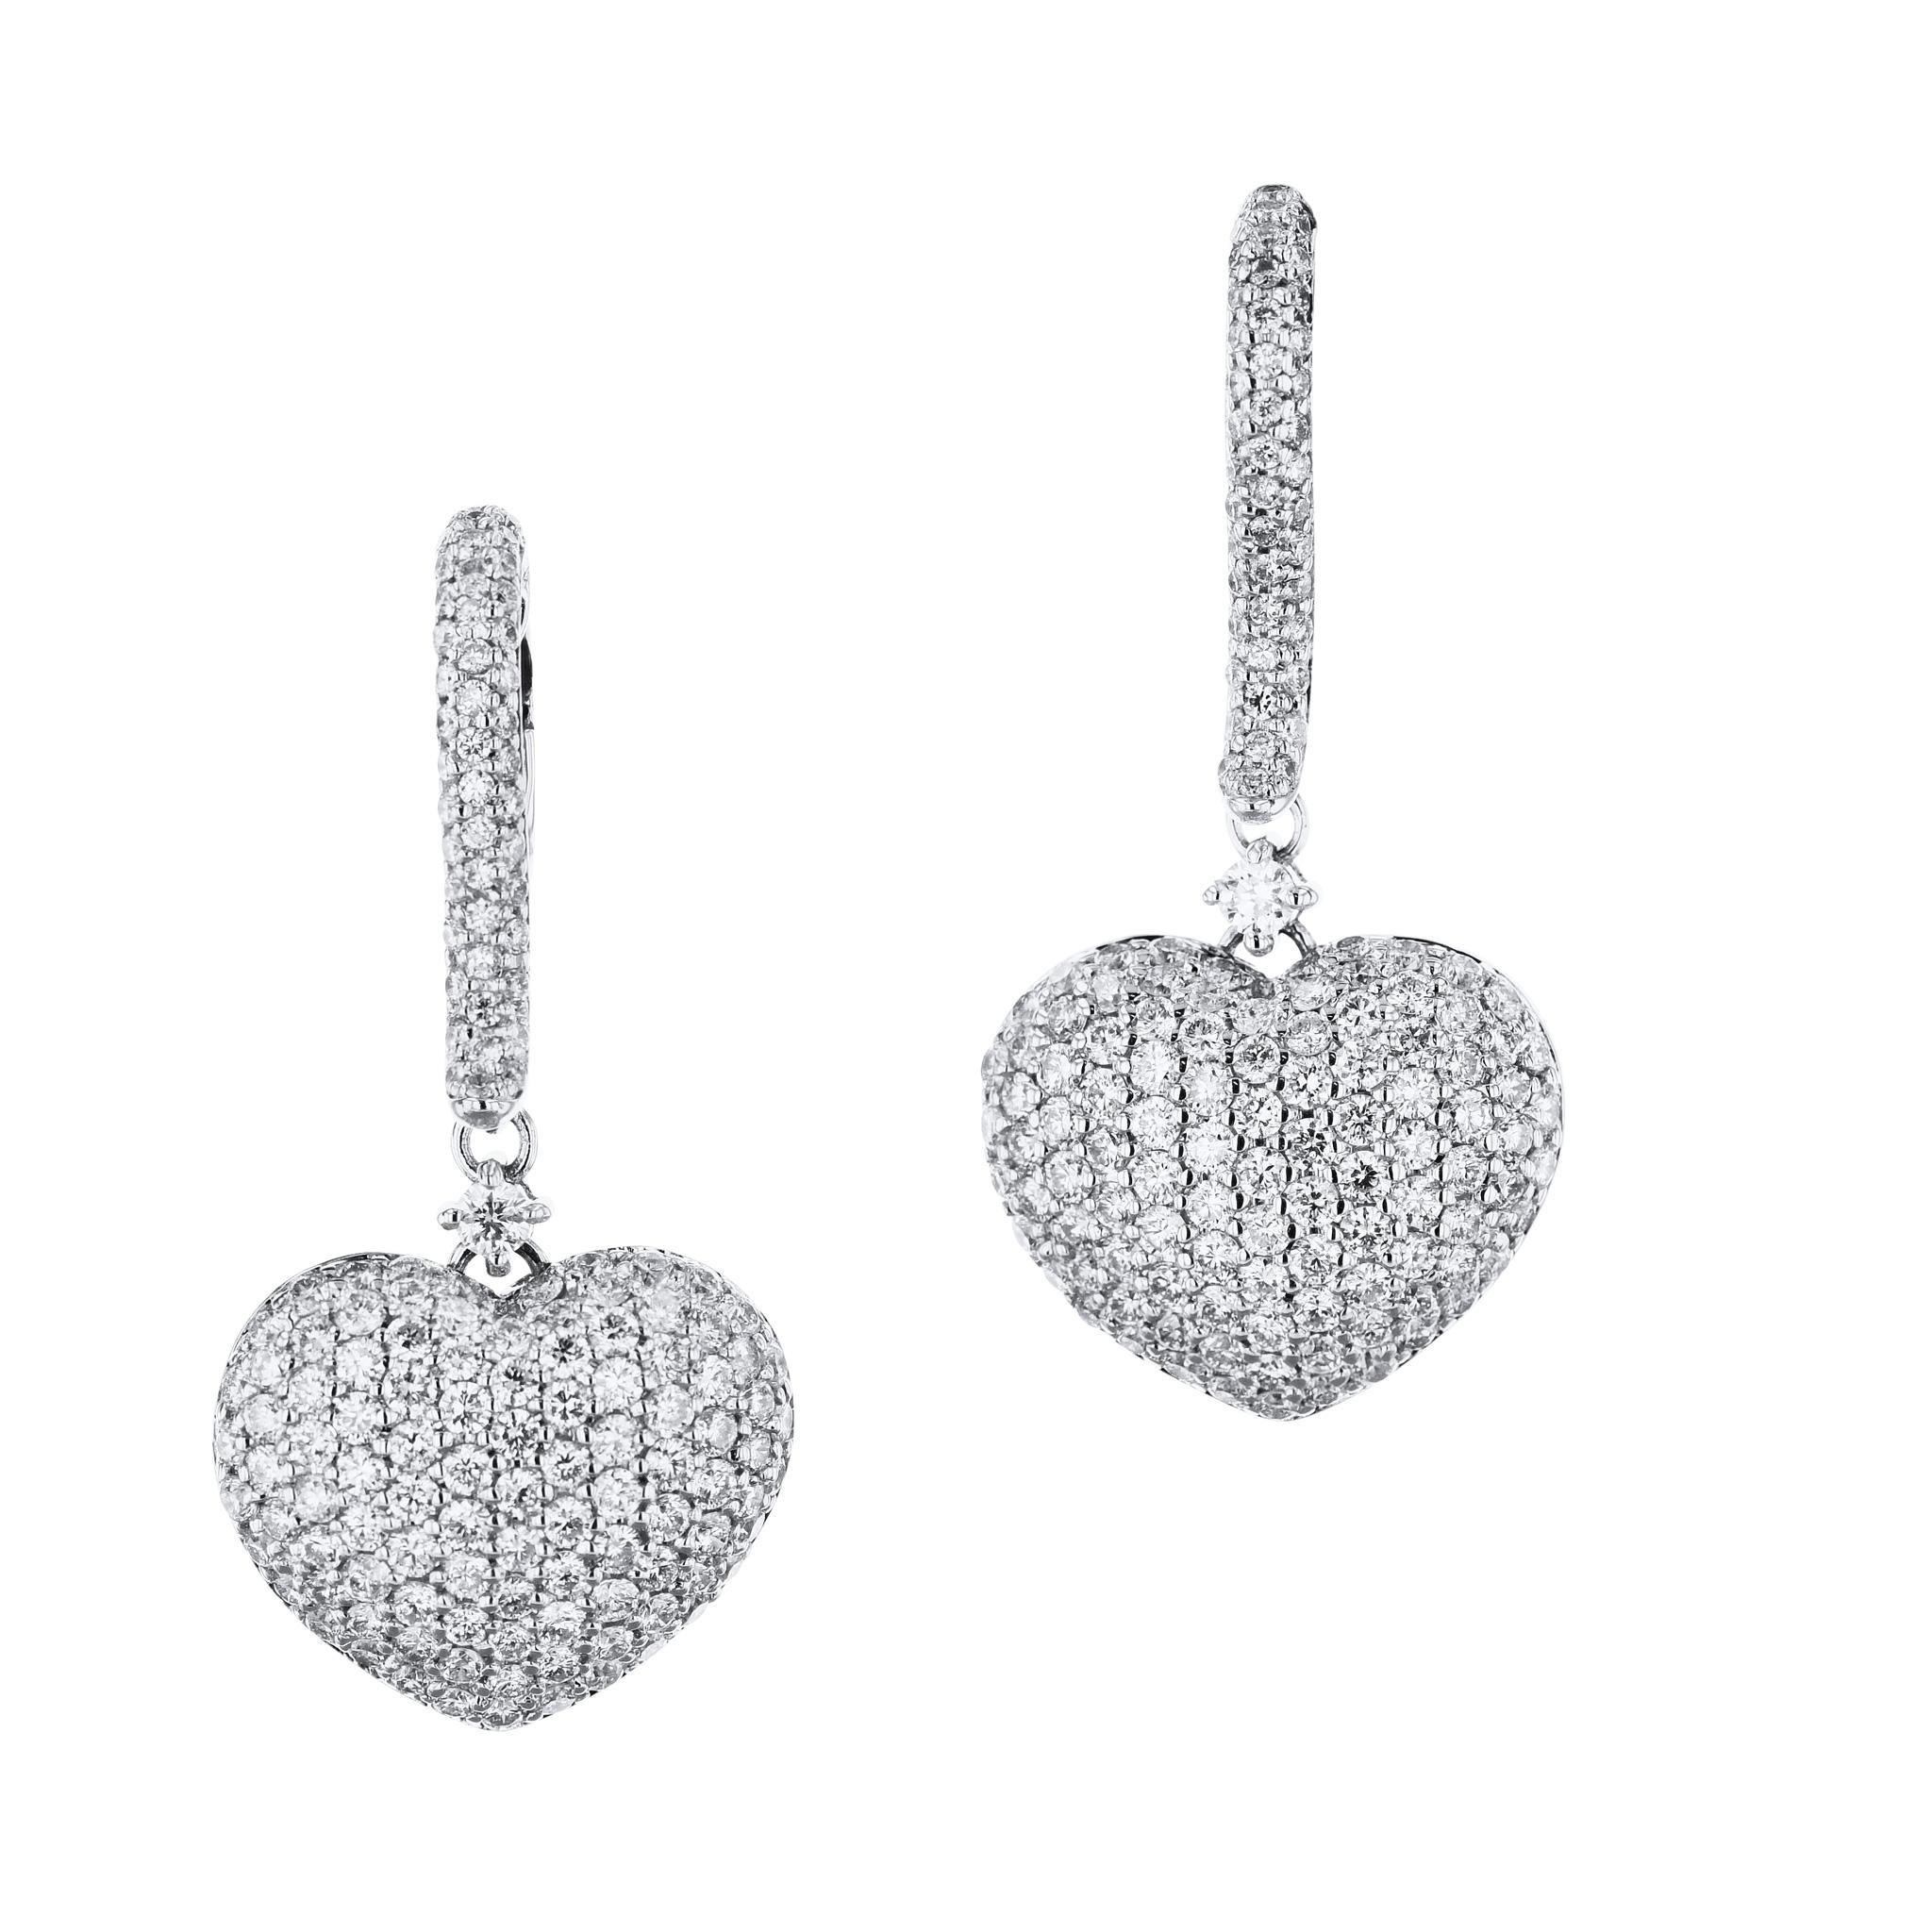 Featuring an exquisite design, these 18 karat White Gold Heart Diamond Pave Drop Earrings are the perfect way to make a bold statement! 
These stunning earrings measure 32 mm long and the heart is 15 mm at it's widest point.

-White Gold Heart